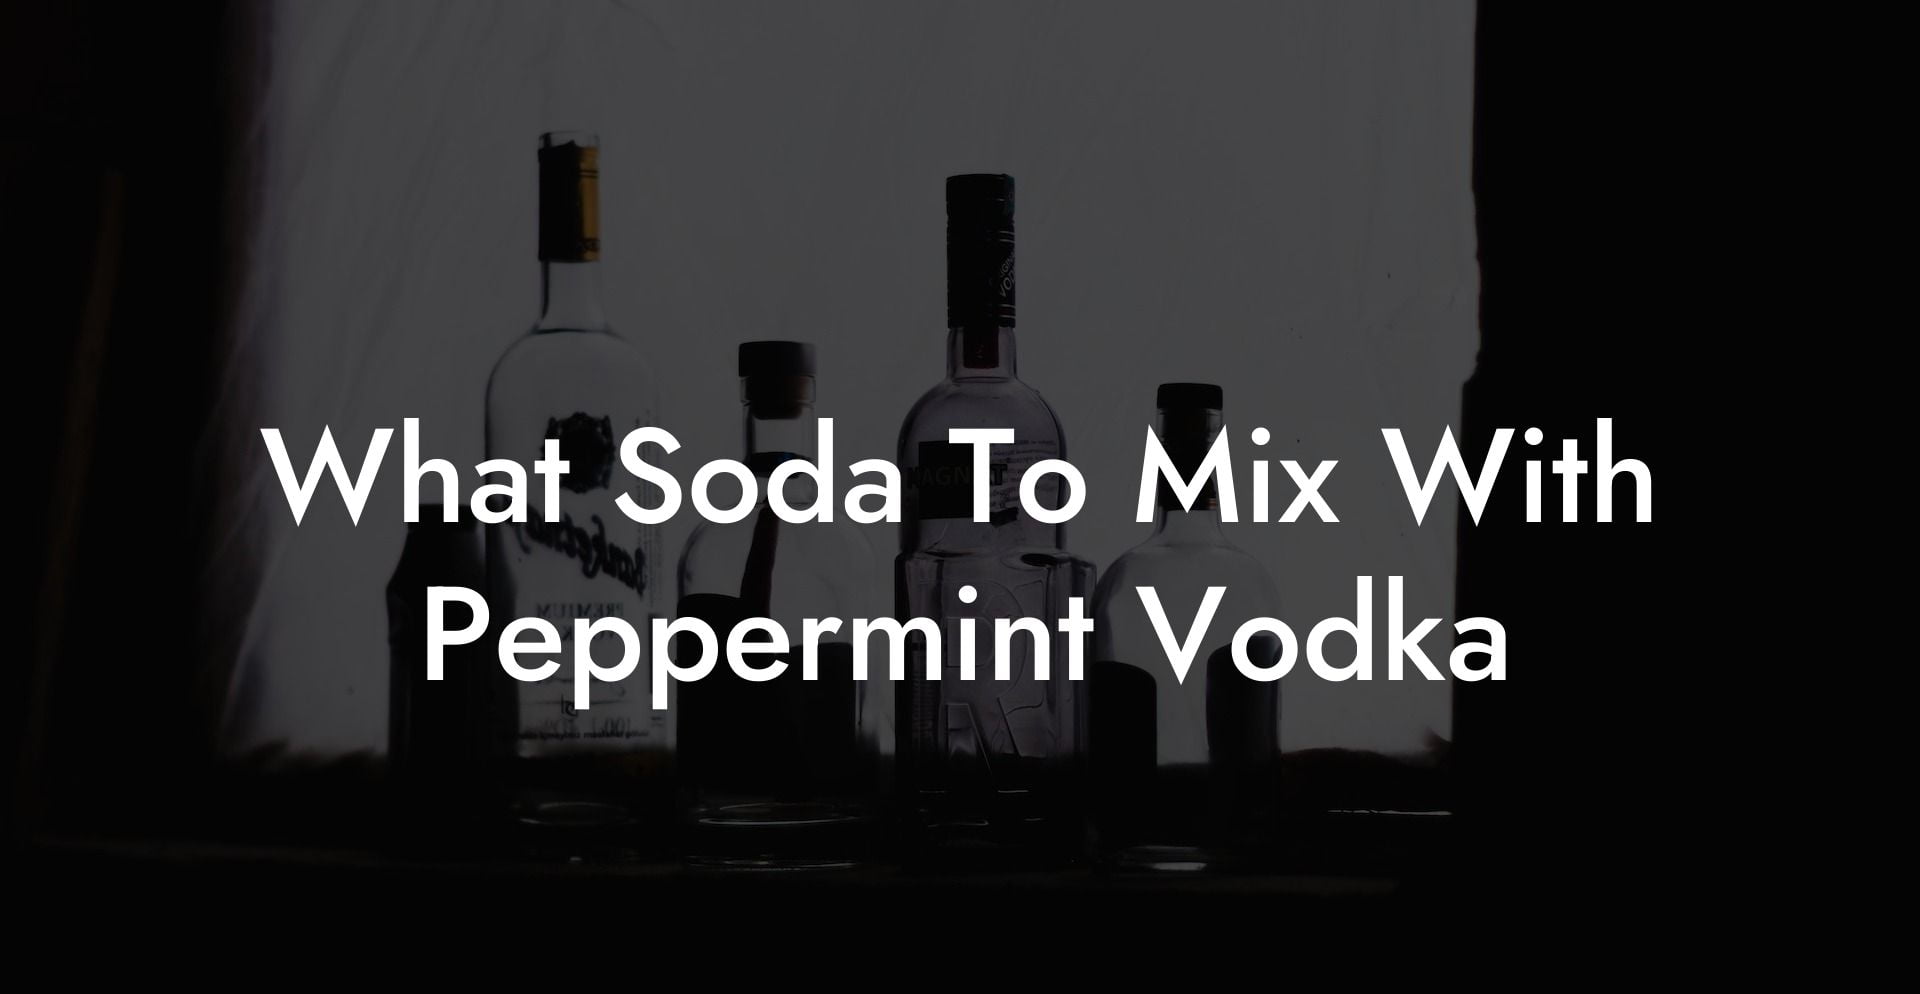 What Soda To Mix With Peppermint Vodka